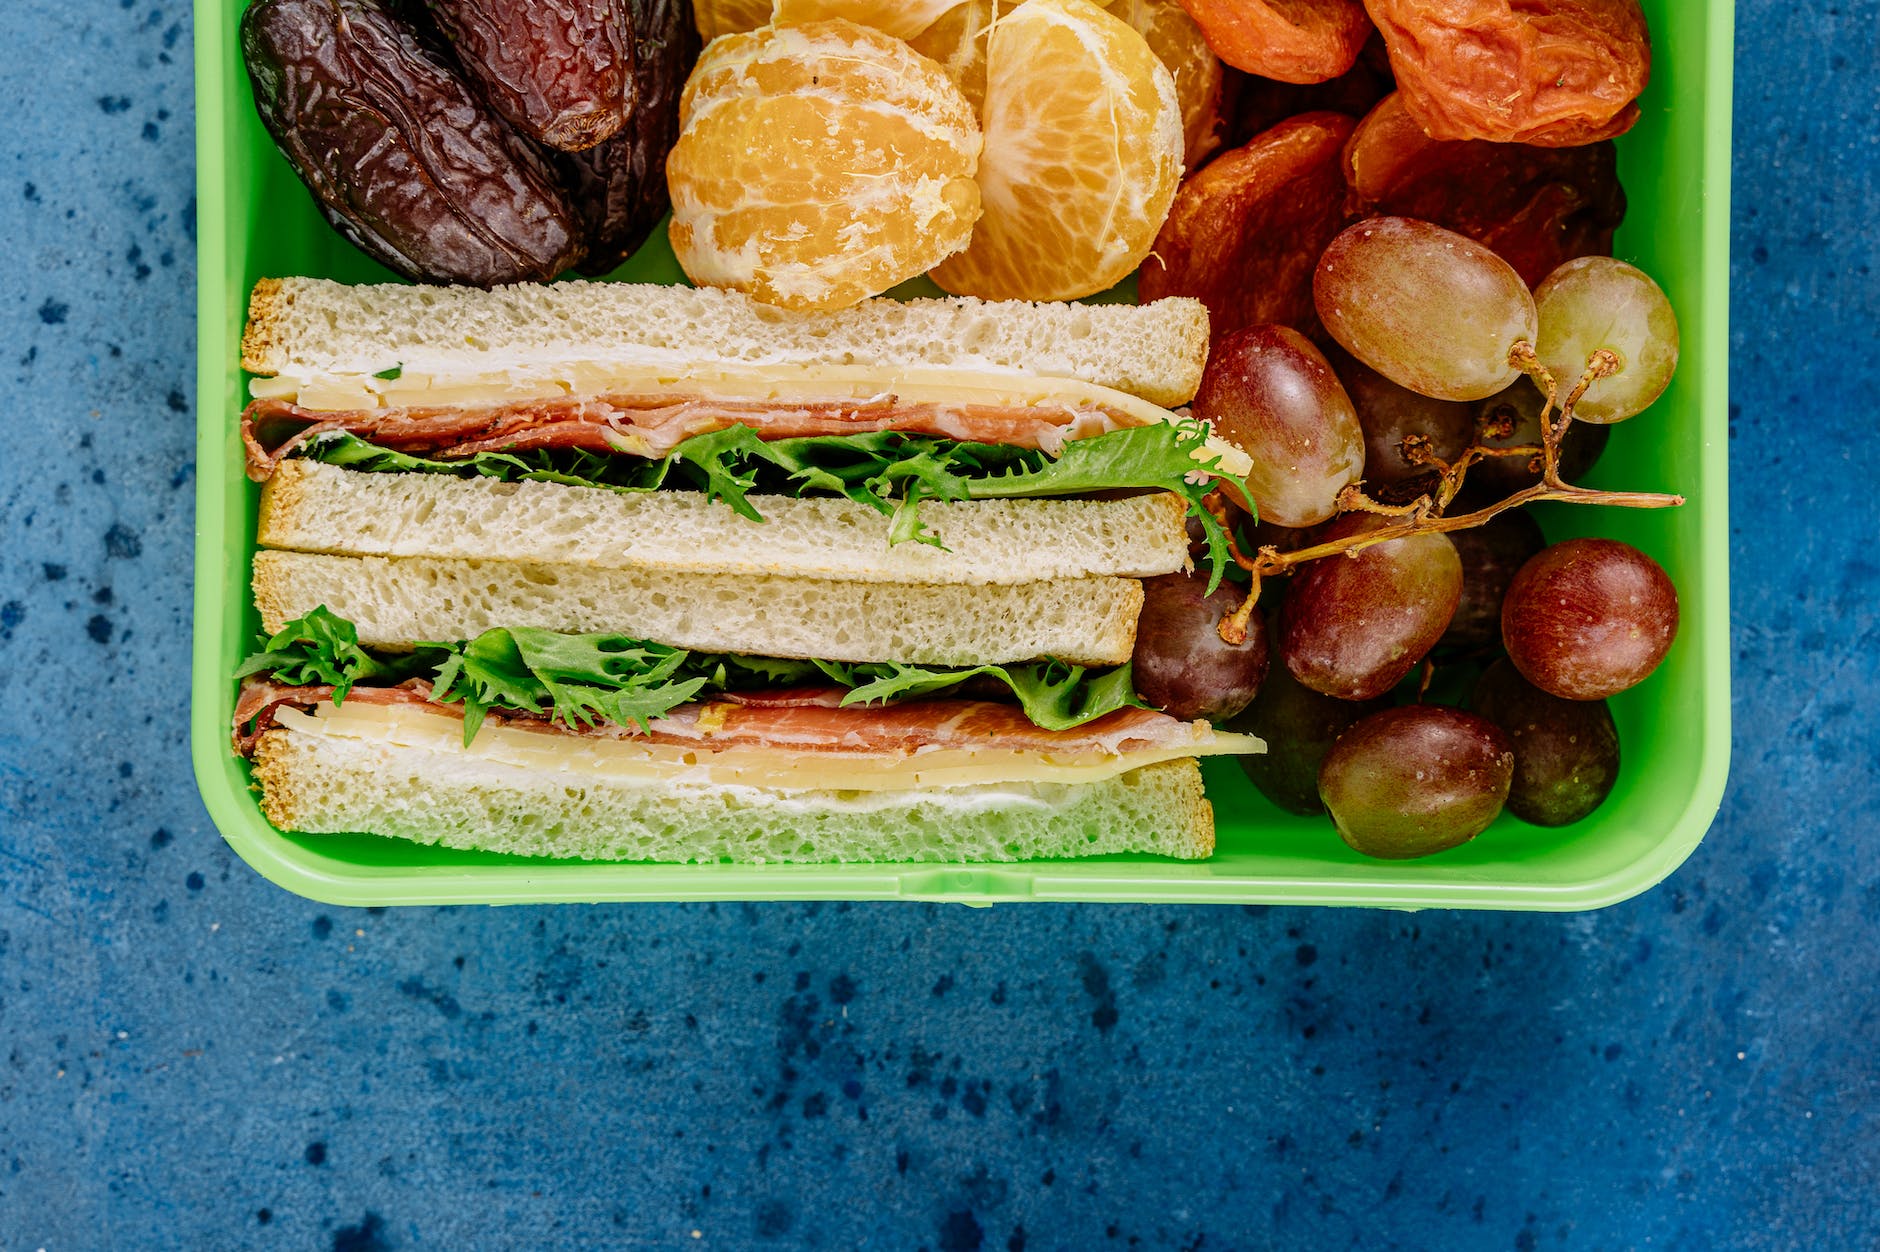 Today’s Simple, but Healthy Recipe: The Sandwich.